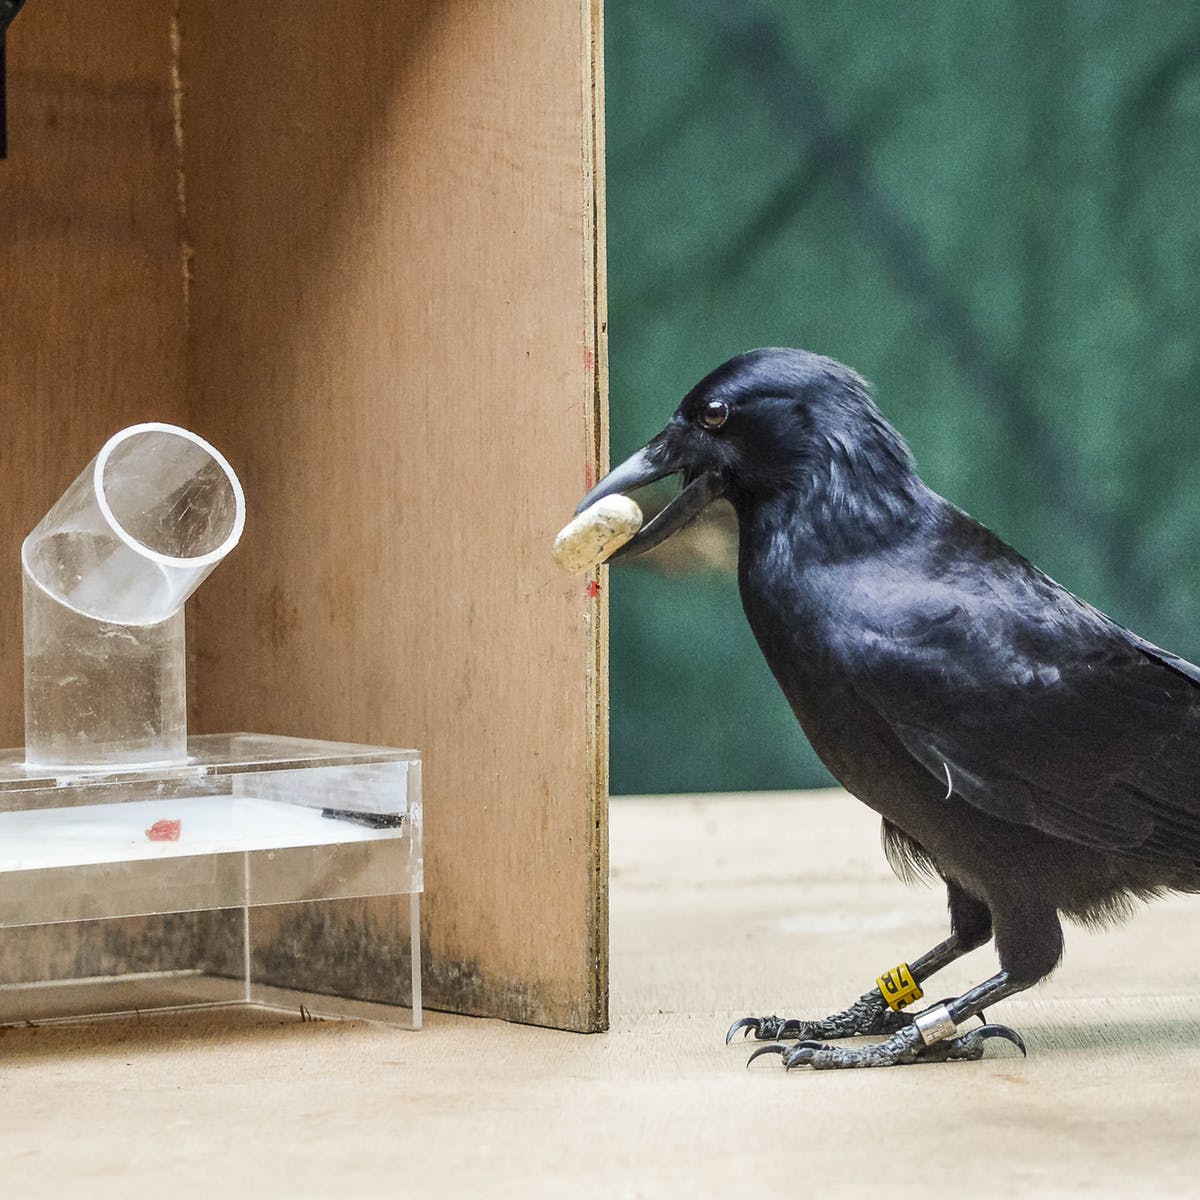 Crows may be smarter than the primates?